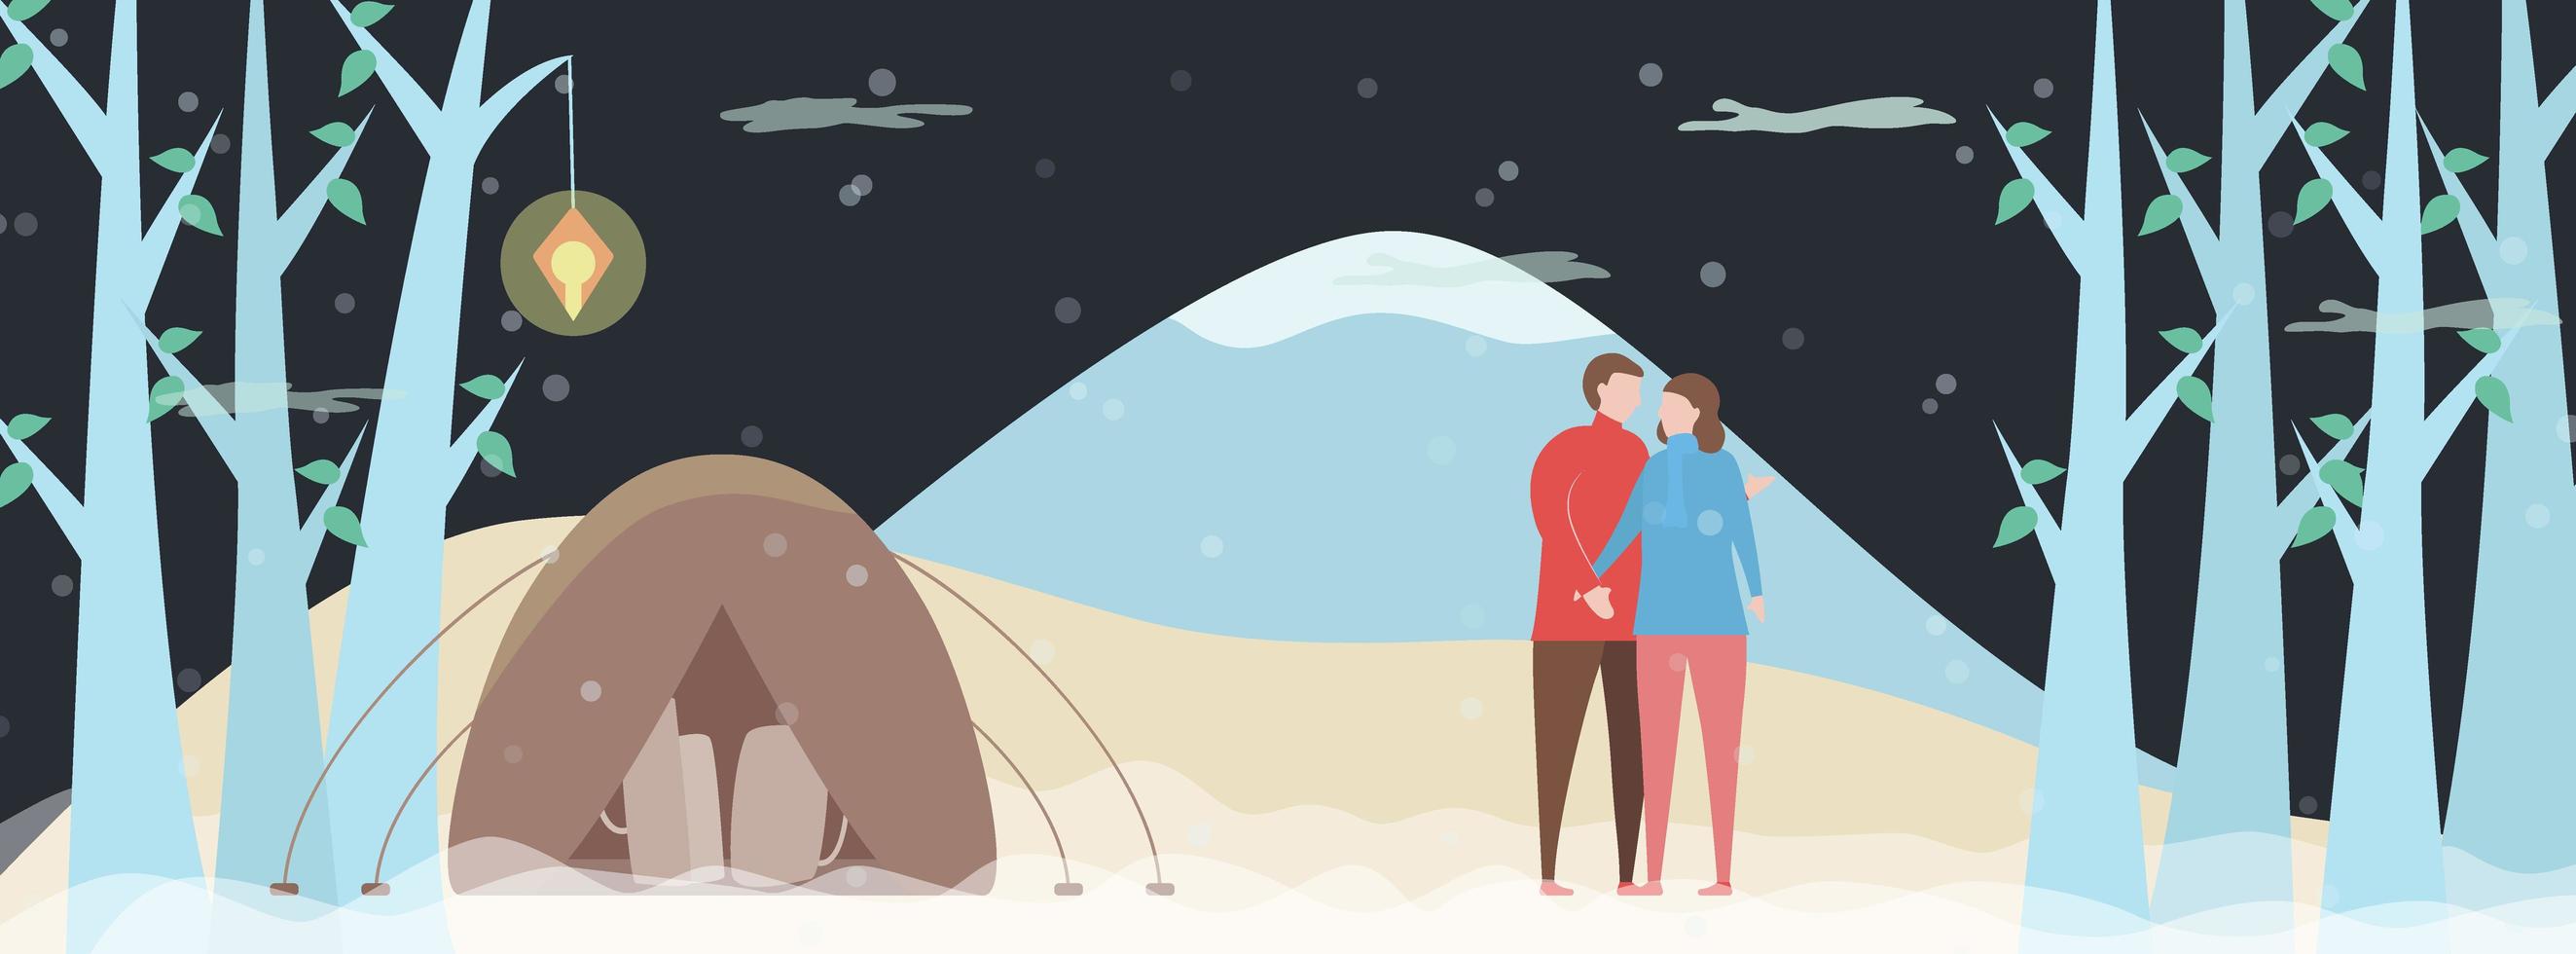 Lovers Camping in the Forest at Night vector